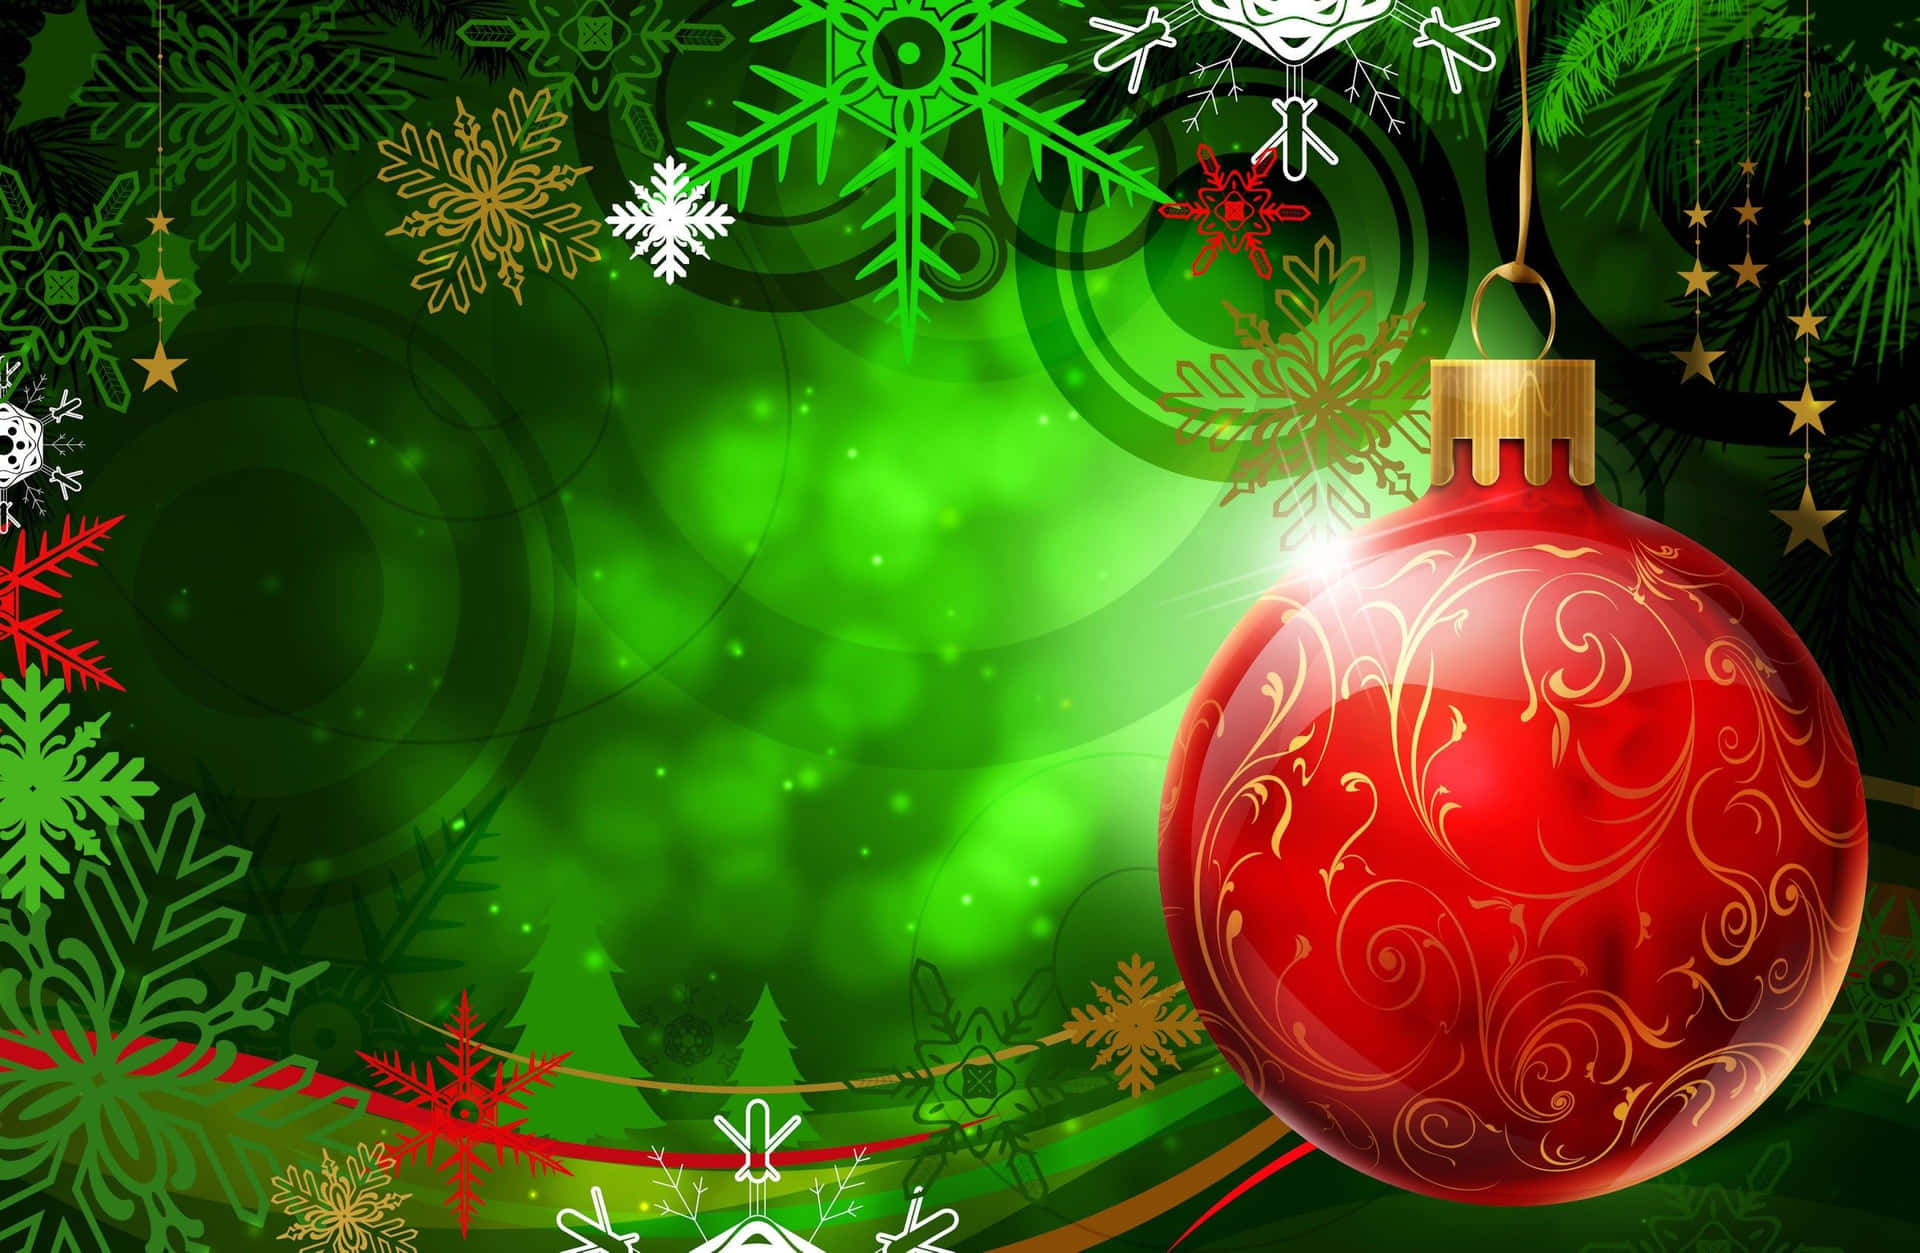 Celebrate Christmas with the joyful colors of Red and Green. Wallpaper